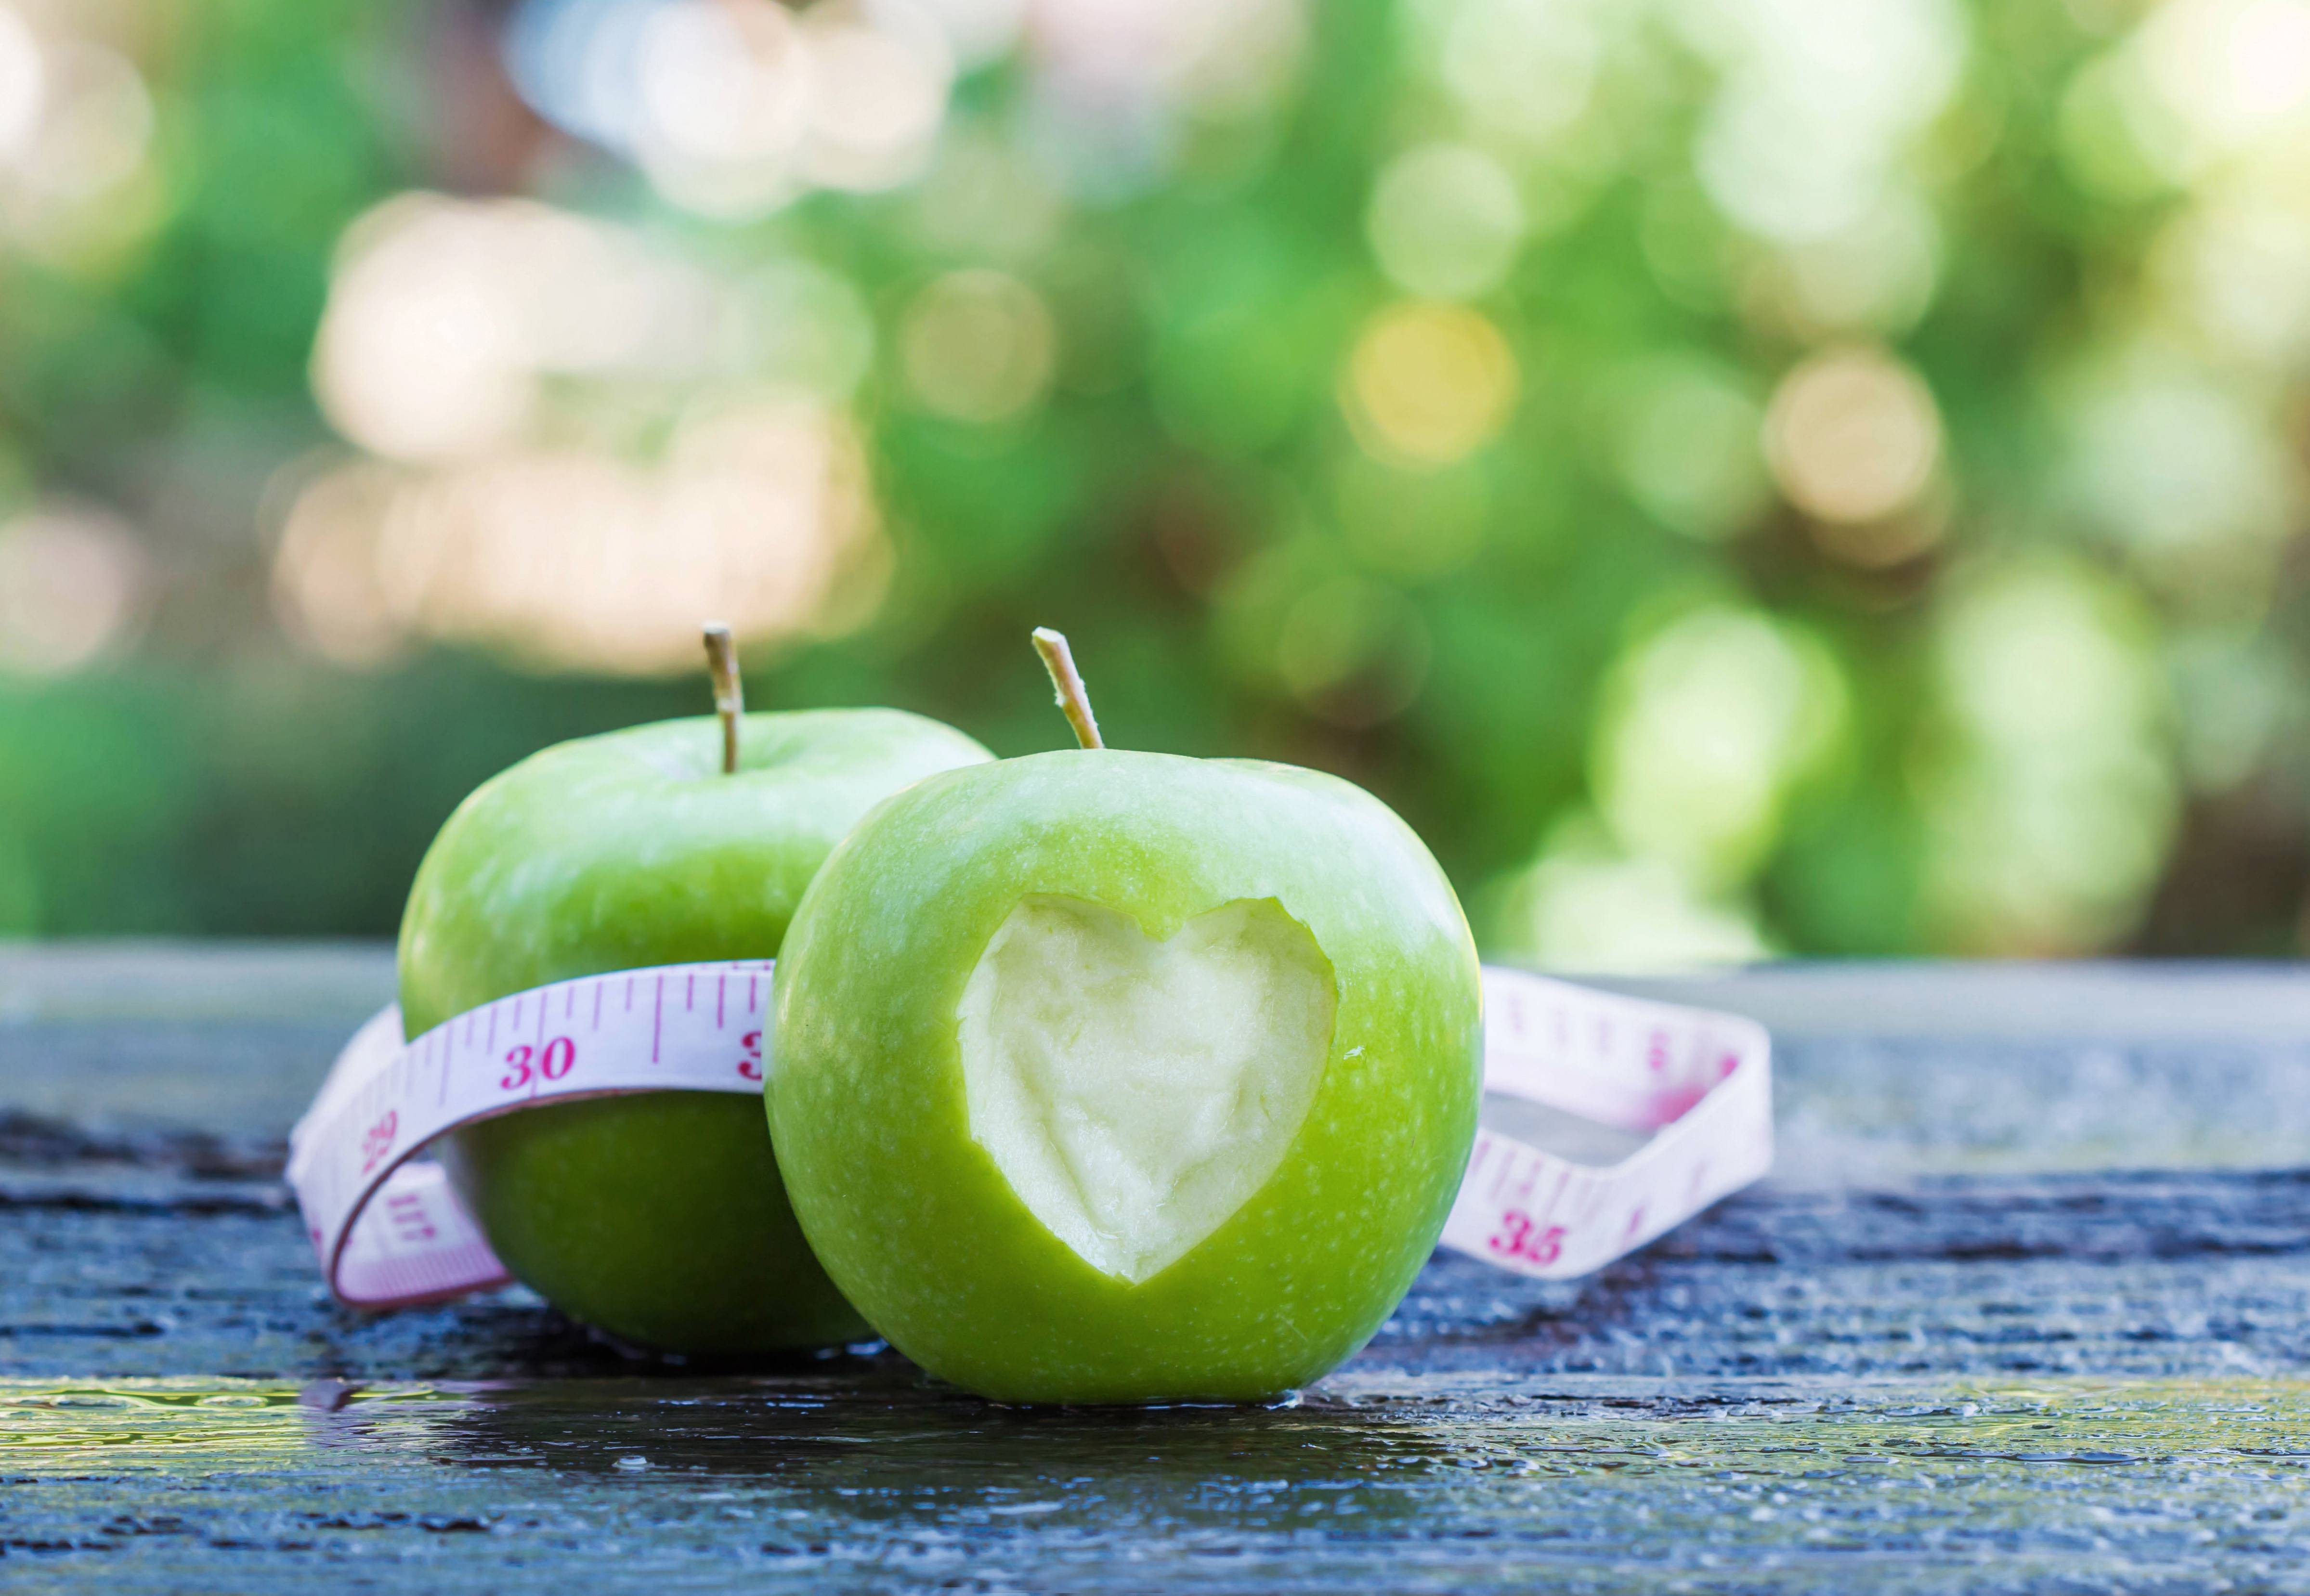 green apples with a heart carved in the skin and a tape measure around the apple representing weightloss and healthy eating